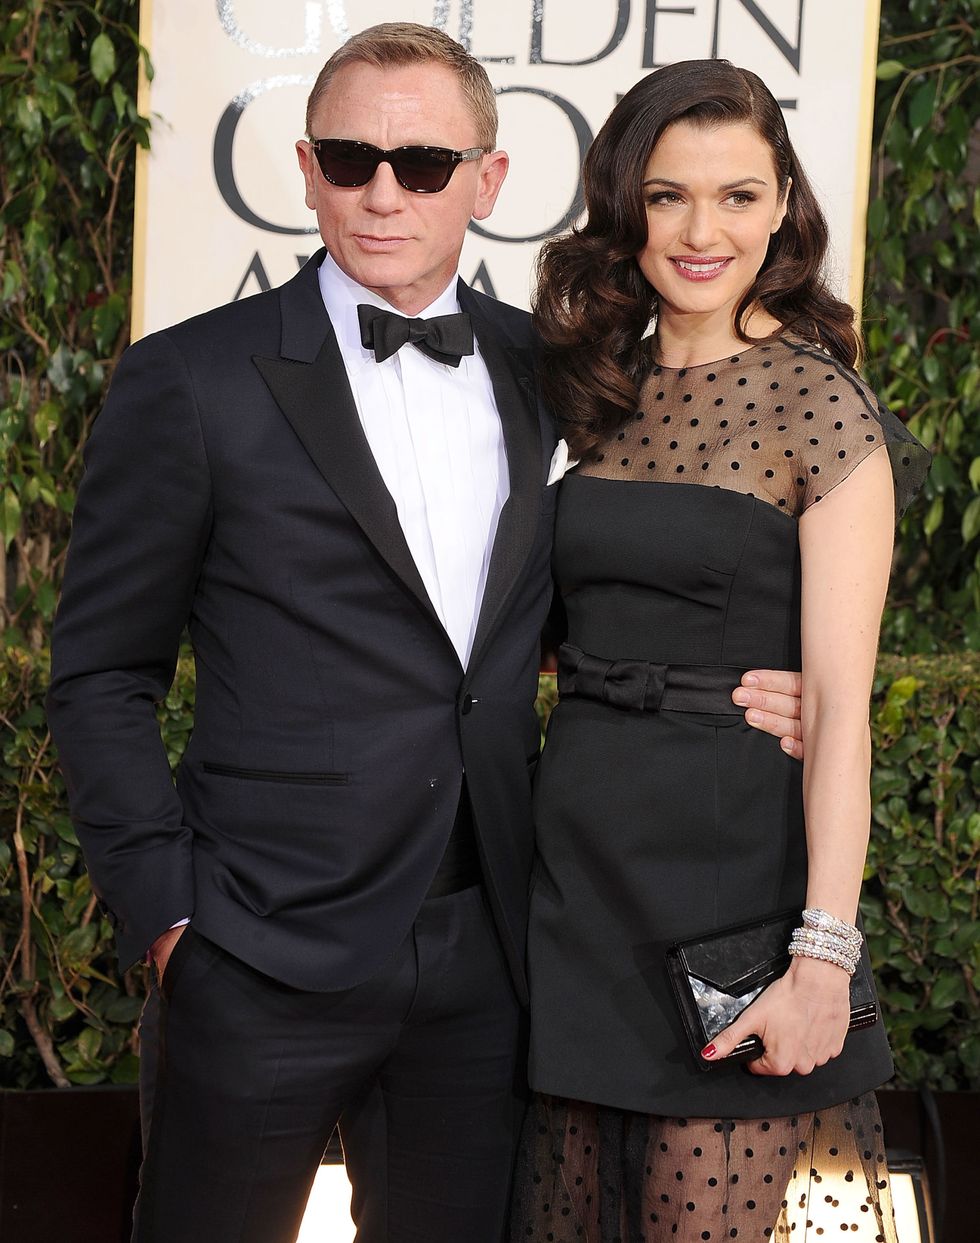 <p><strong>Why you forget they're together: </strong>They're too famous to talk about. No, really. Weisz told <a href="http://www.eonline.com/news/717030/rachel-weisz-on-keeping-her-marriage-to-daniel-craig-private-he-s-just-too-famous" target="_blank"><em>More</em> Magazine</a> in their December/January 2015 issue, "He's just too famous. It would be a betrayal" to talk about her marriage to Daniel Craig. </p><p><strong>How long they've been together: </strong>They wed in a secret ceremony in June 2011 with only four guests in attendance.  </p><p><strong>How cute they are: </strong>This is the real life James Bond we're talking about here. Of course they're cute. </p>